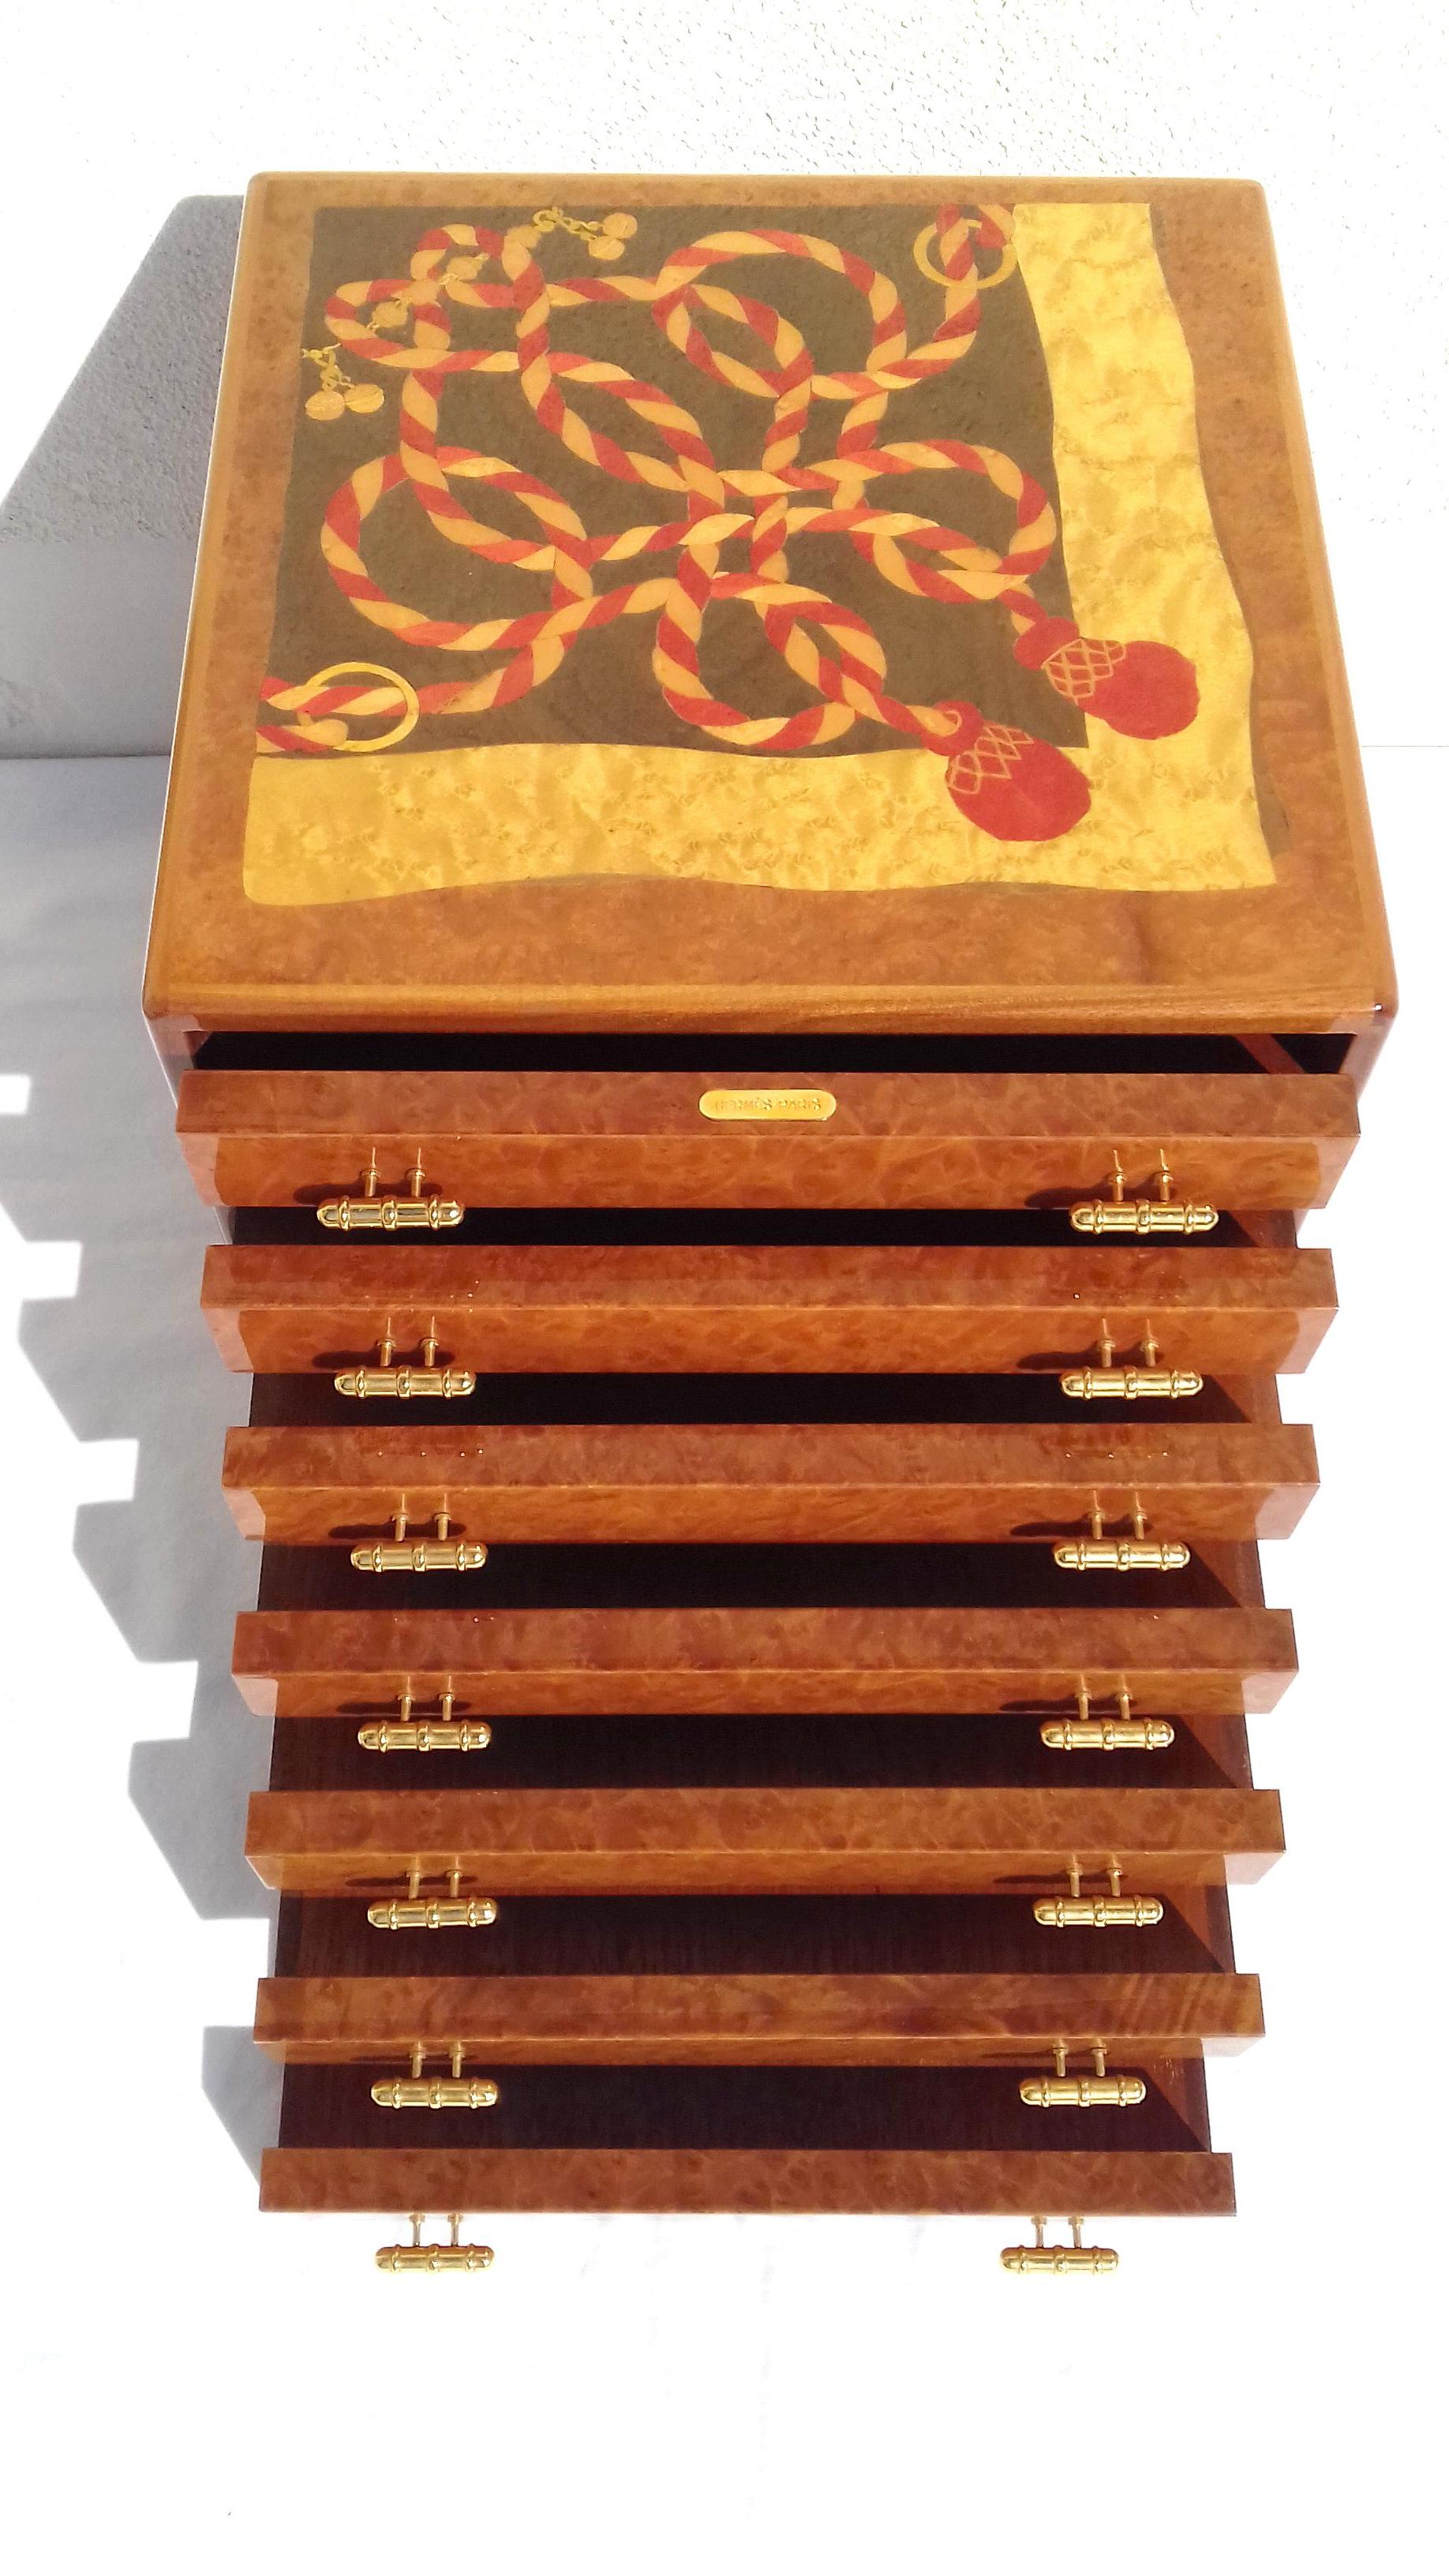 Exceptional Hermès Drawer to store scarves or Jewelry In Wood Inlaid RARE 8